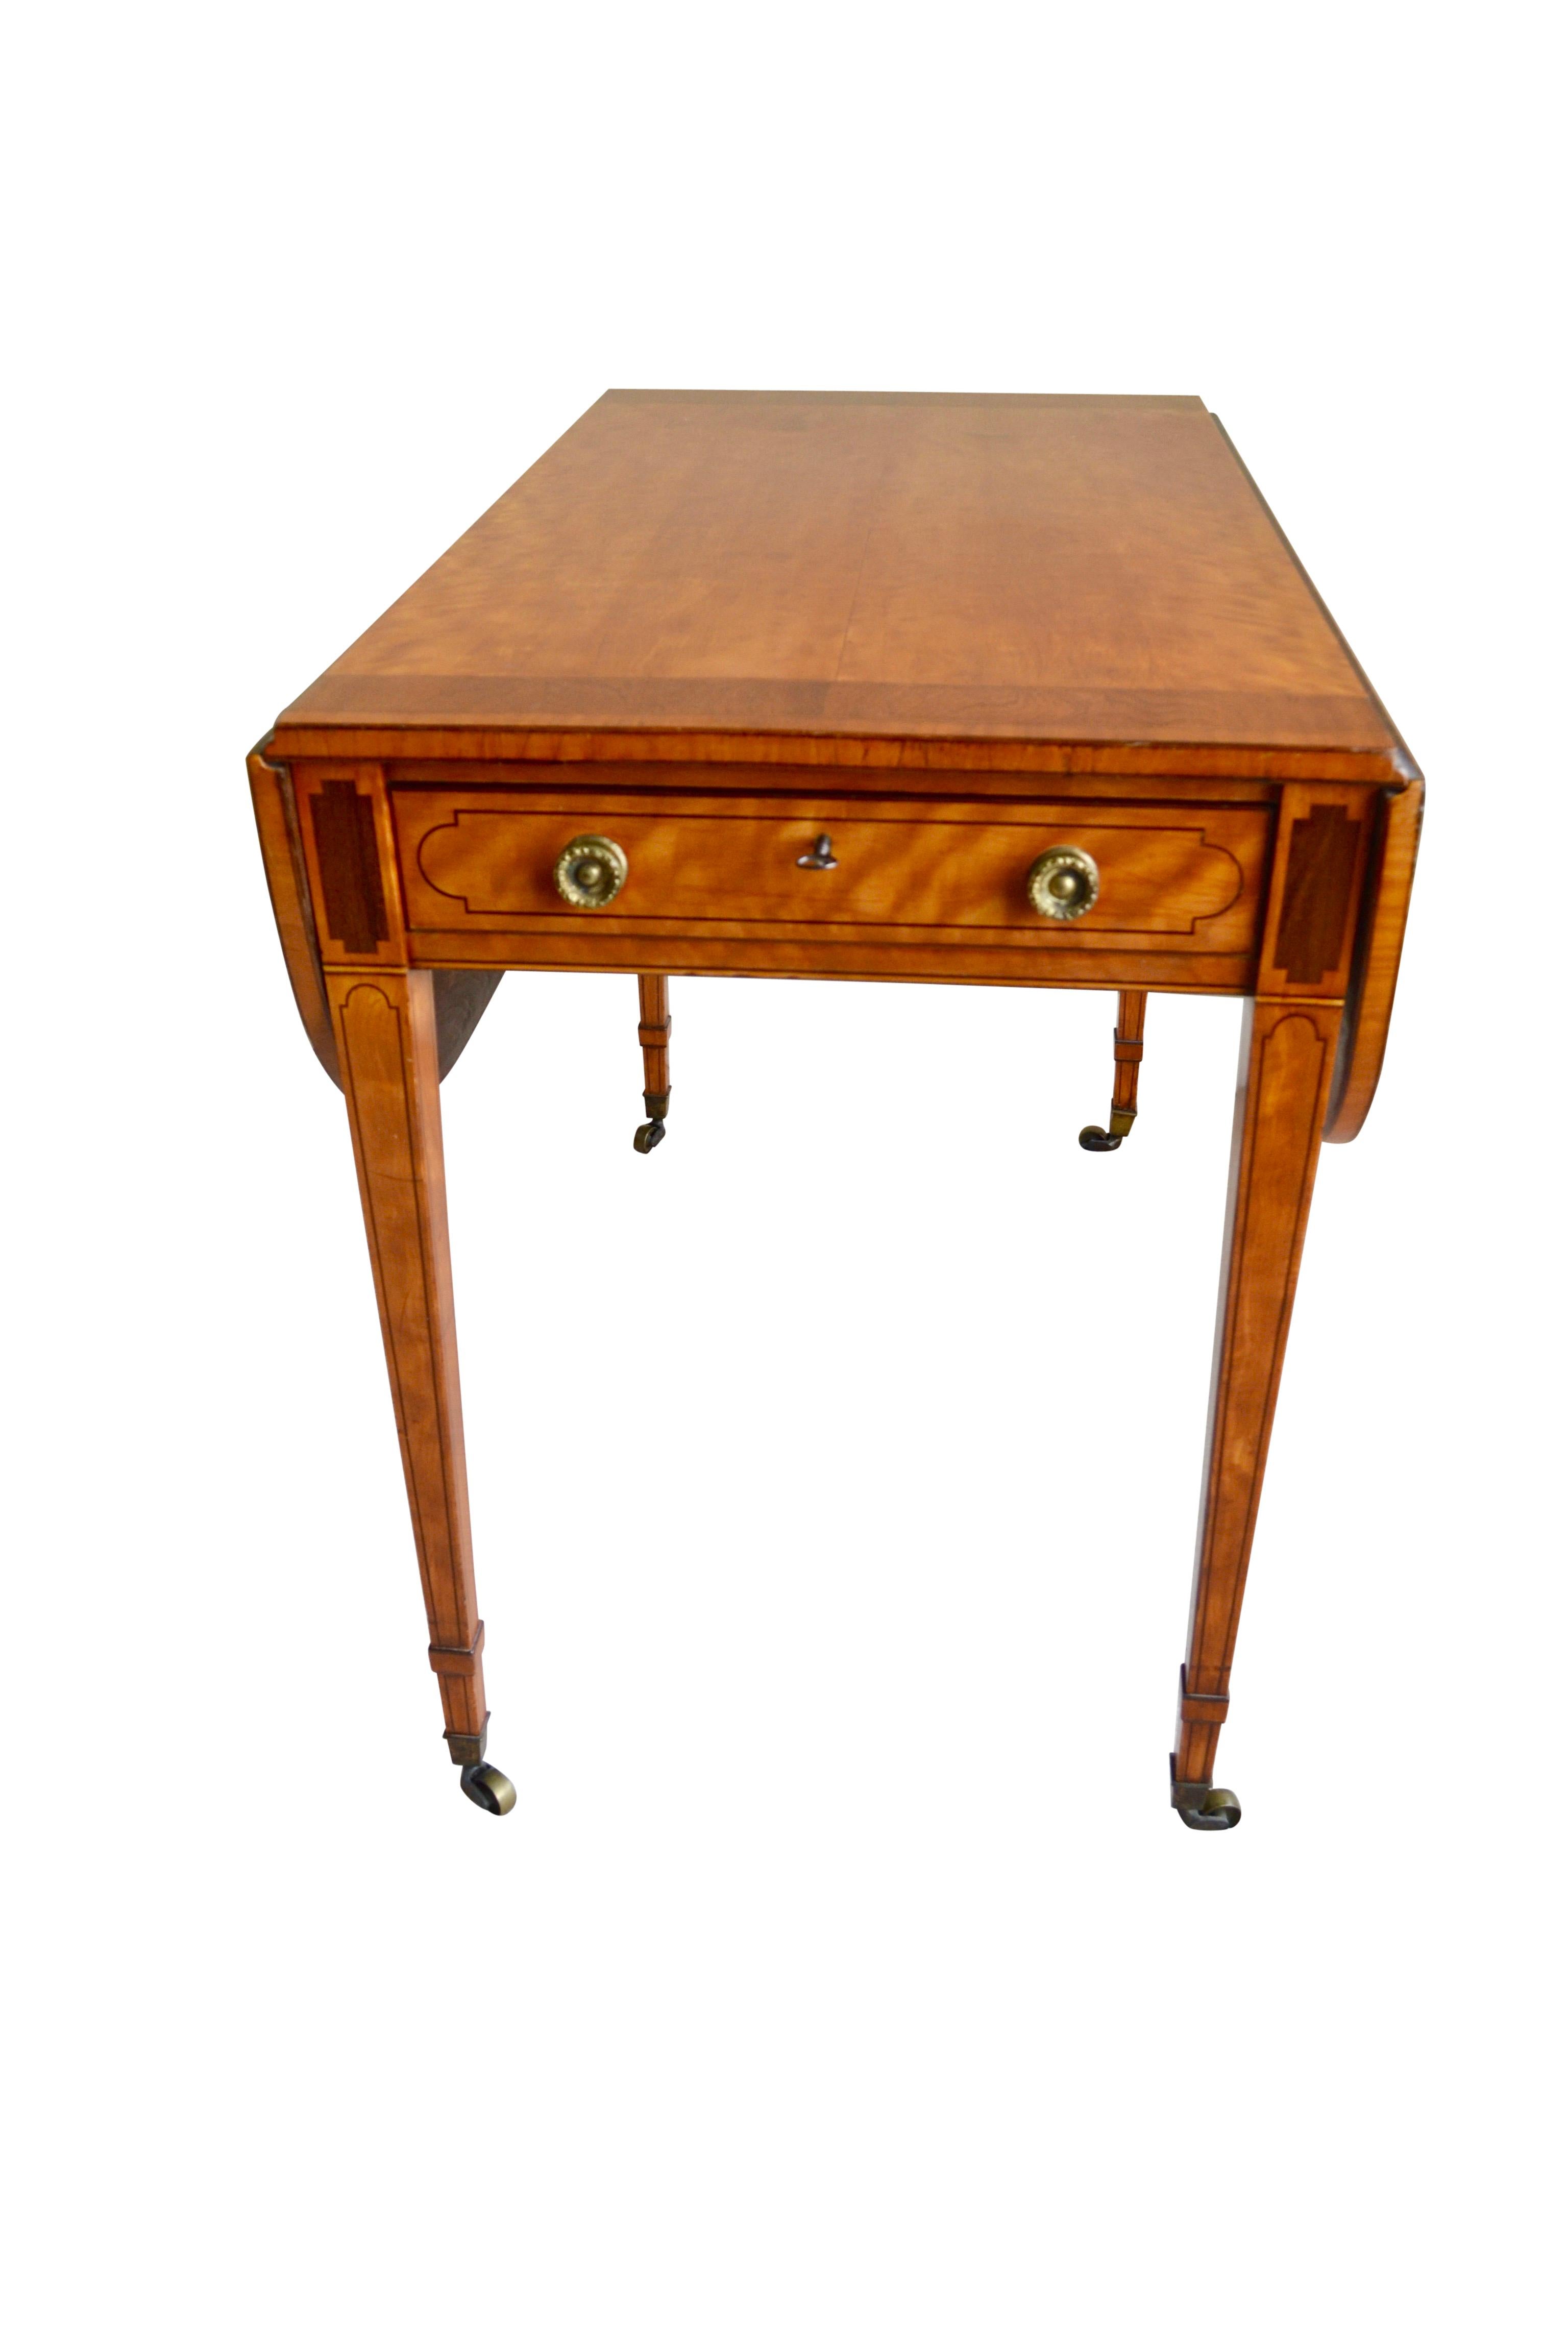 English 18th Century Sheraton Pembroke Drop Leaf Table In Good Condition For Sale In Vancouver, British Columbia